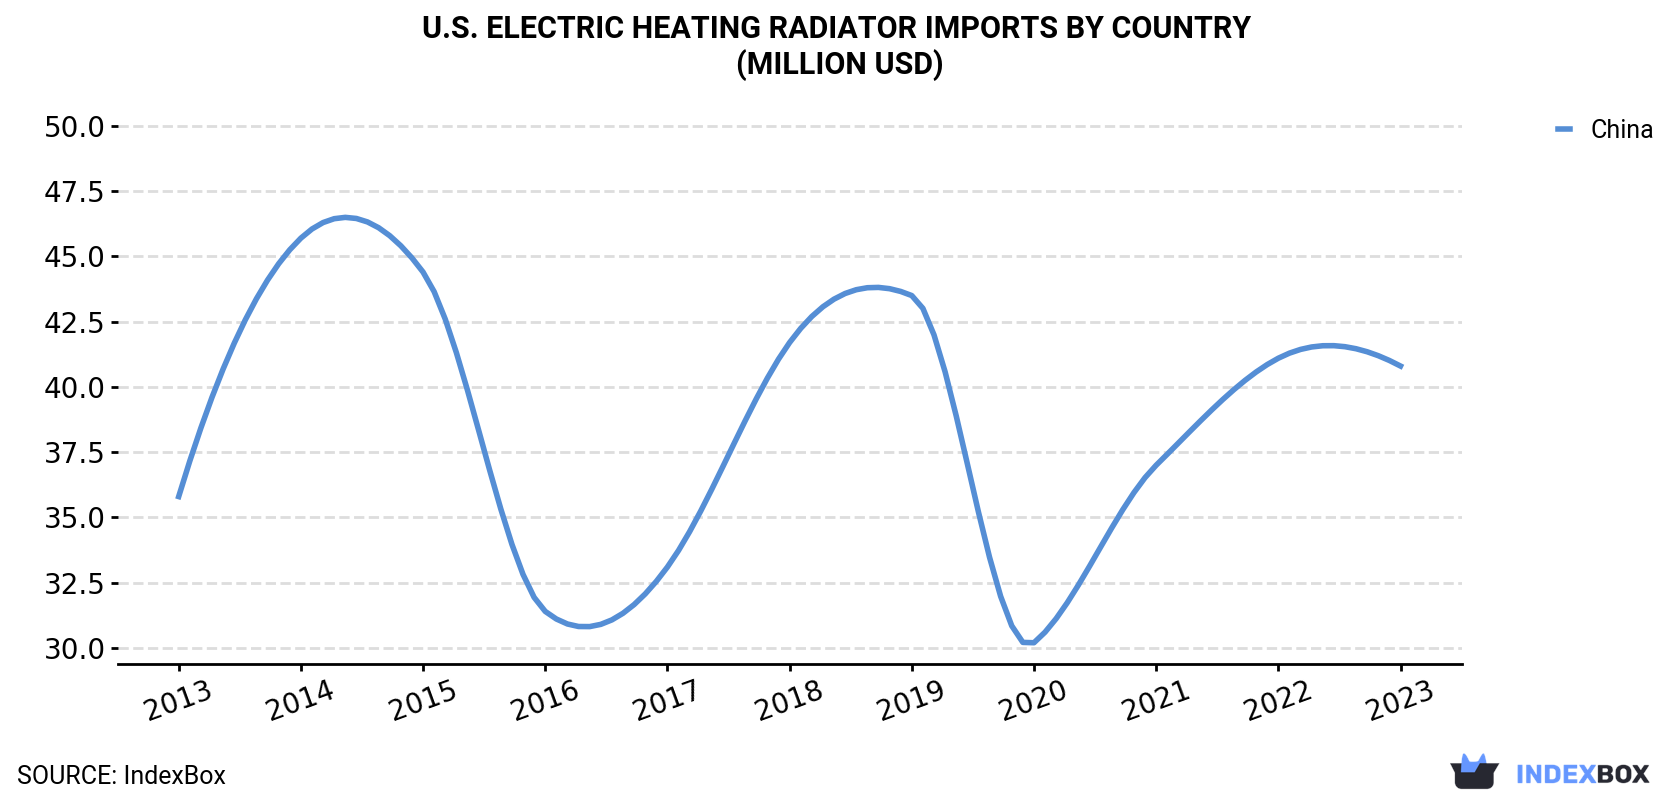 U.S. Electric Heating Radiator Imports By Country (Million USD)